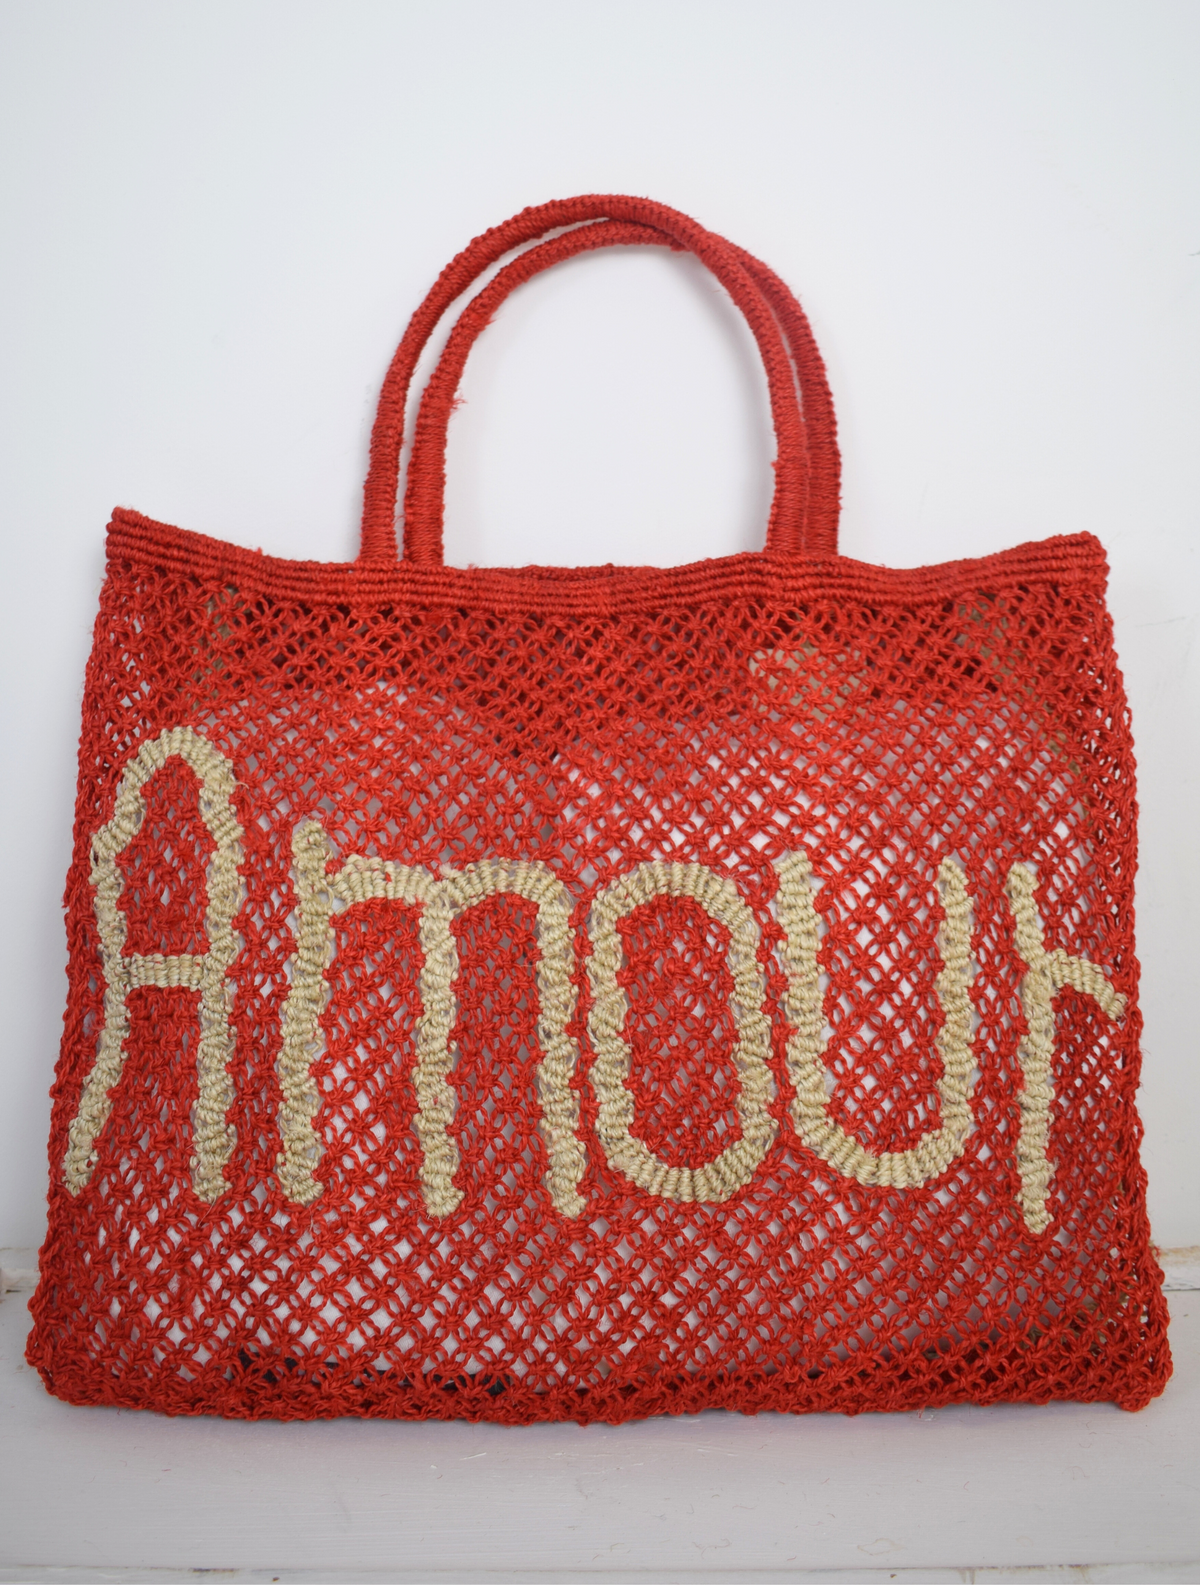 red woven bag with nude writing on saying Amour